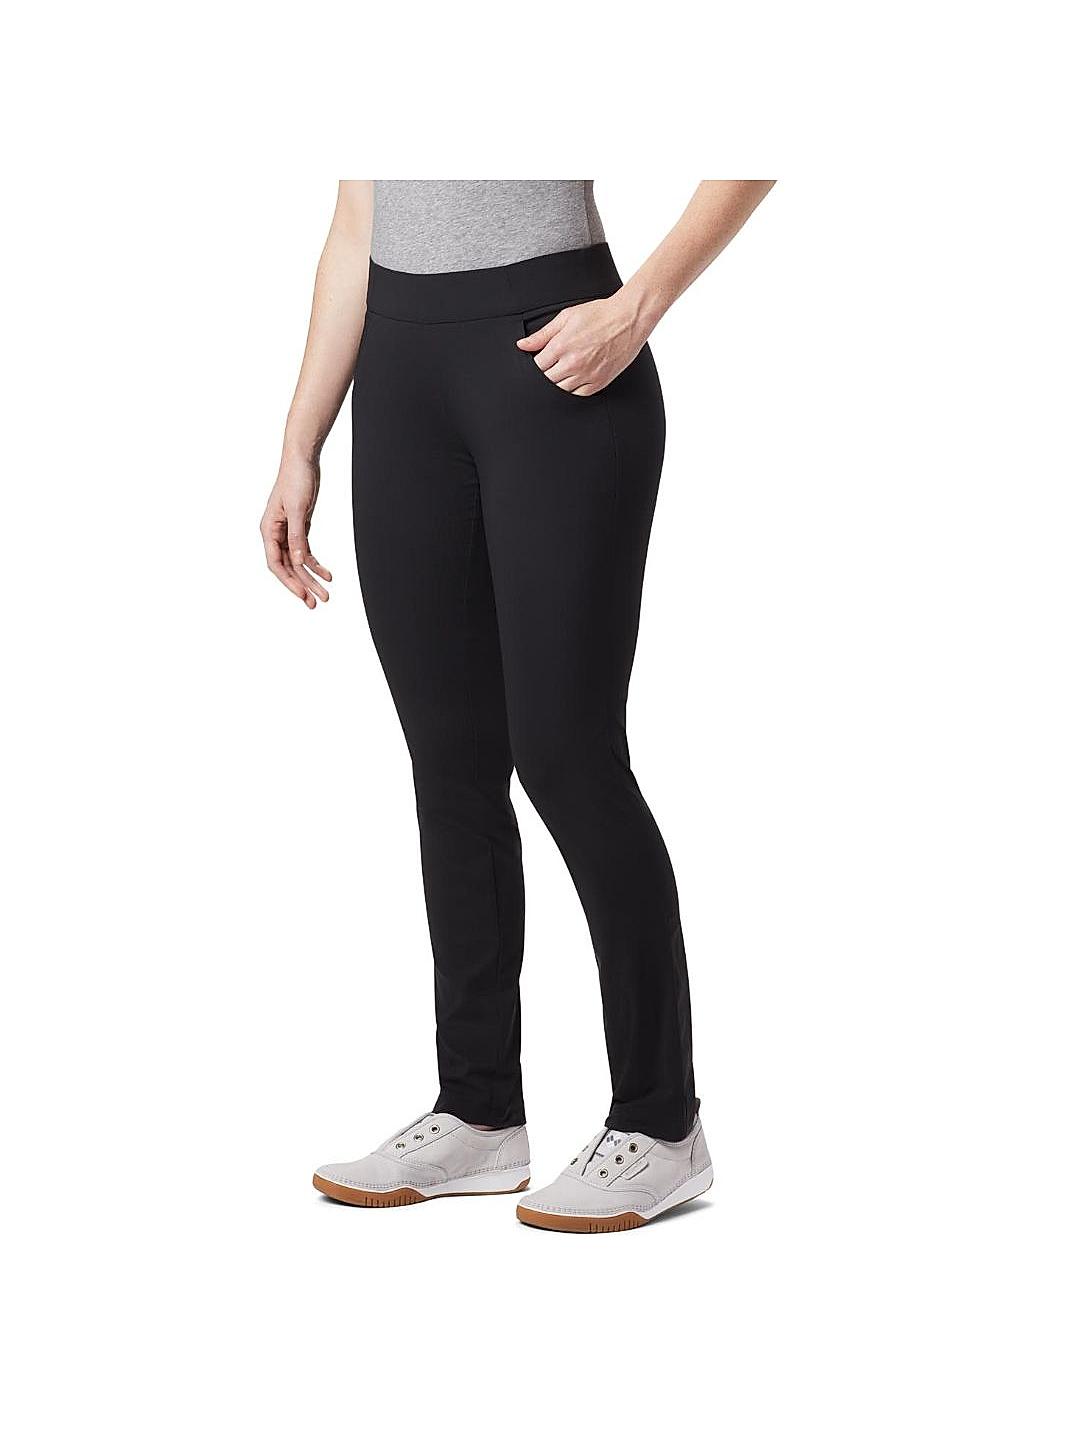 19 Best Black Gym Leggings 2022 for Every Workout | Glamour UK